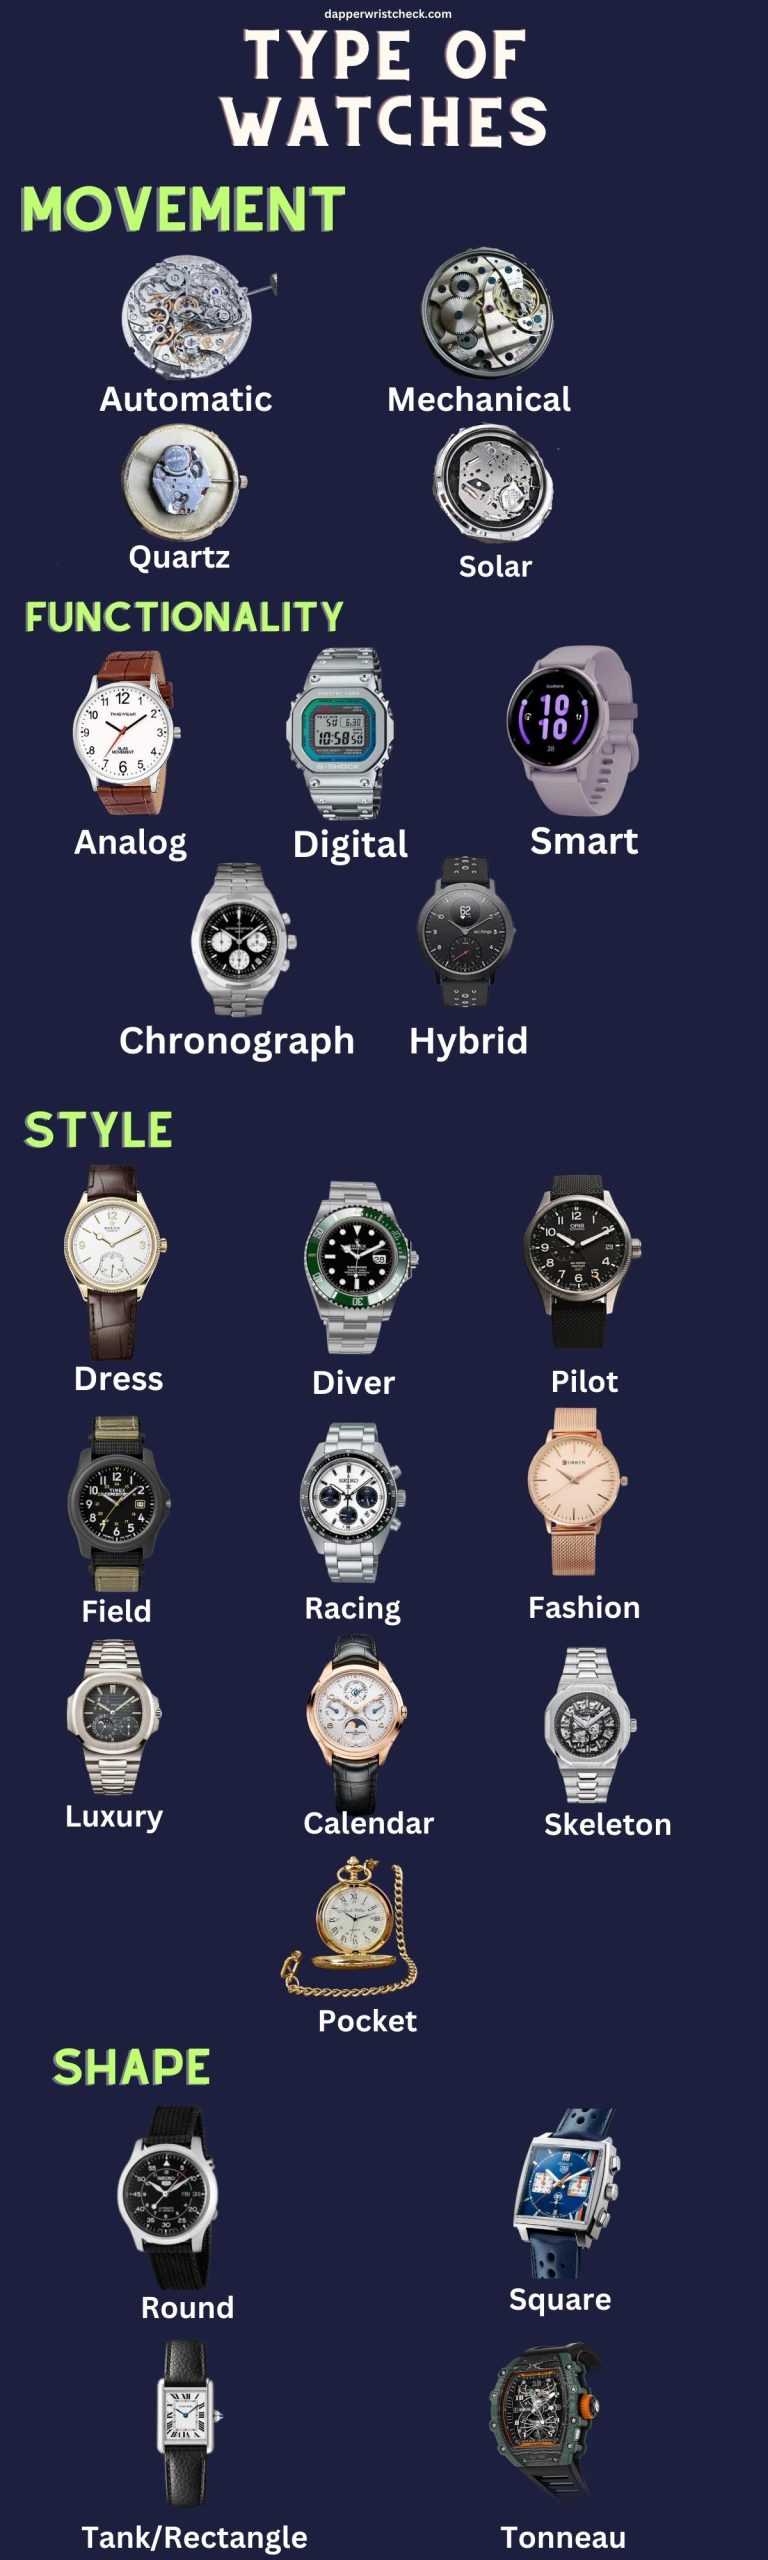 Types of Watches